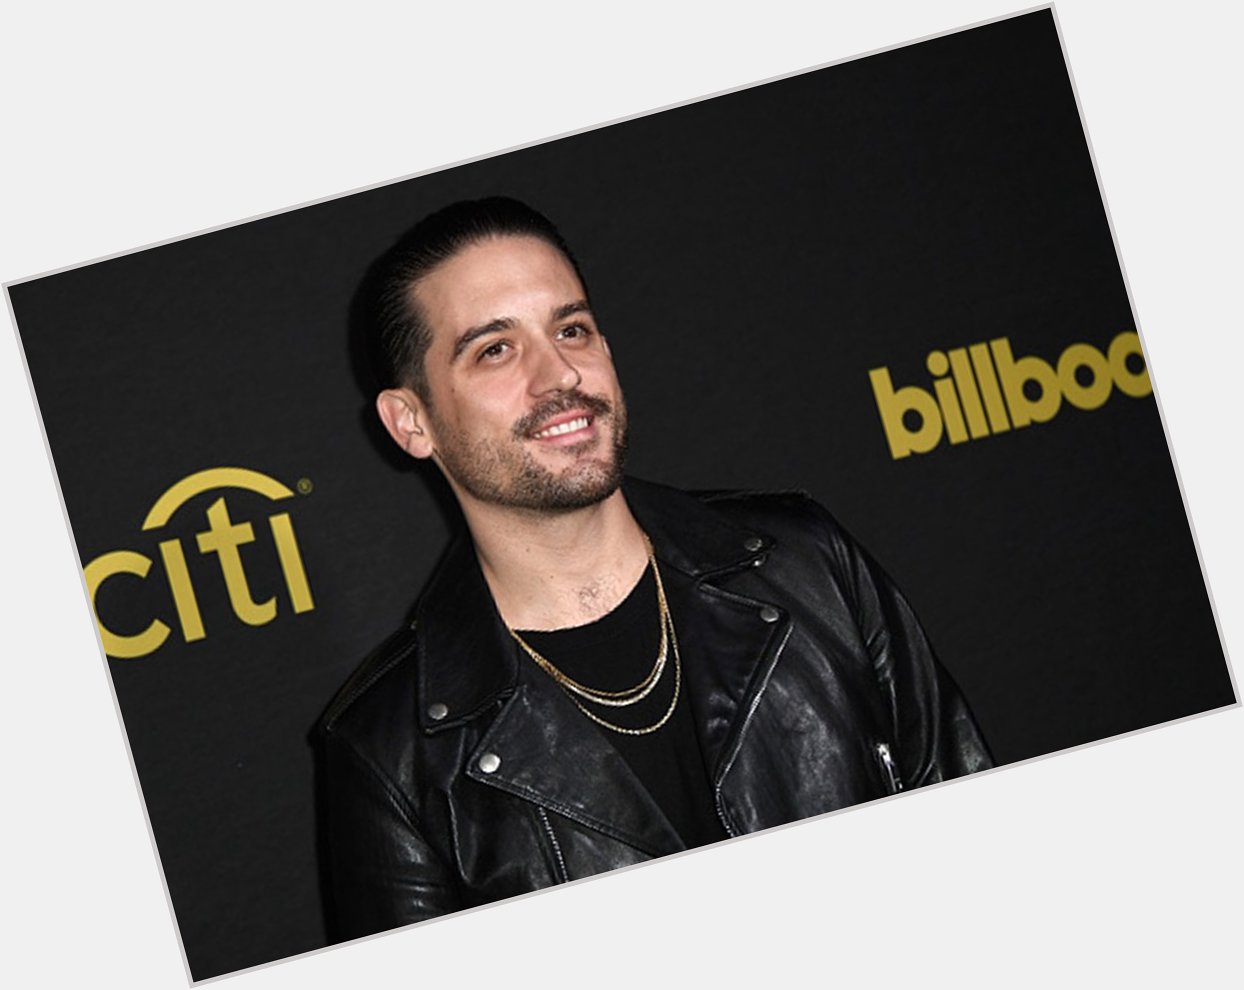 New post (Happy Birthday, G-Eazy!) has been published on Dubstep News -  